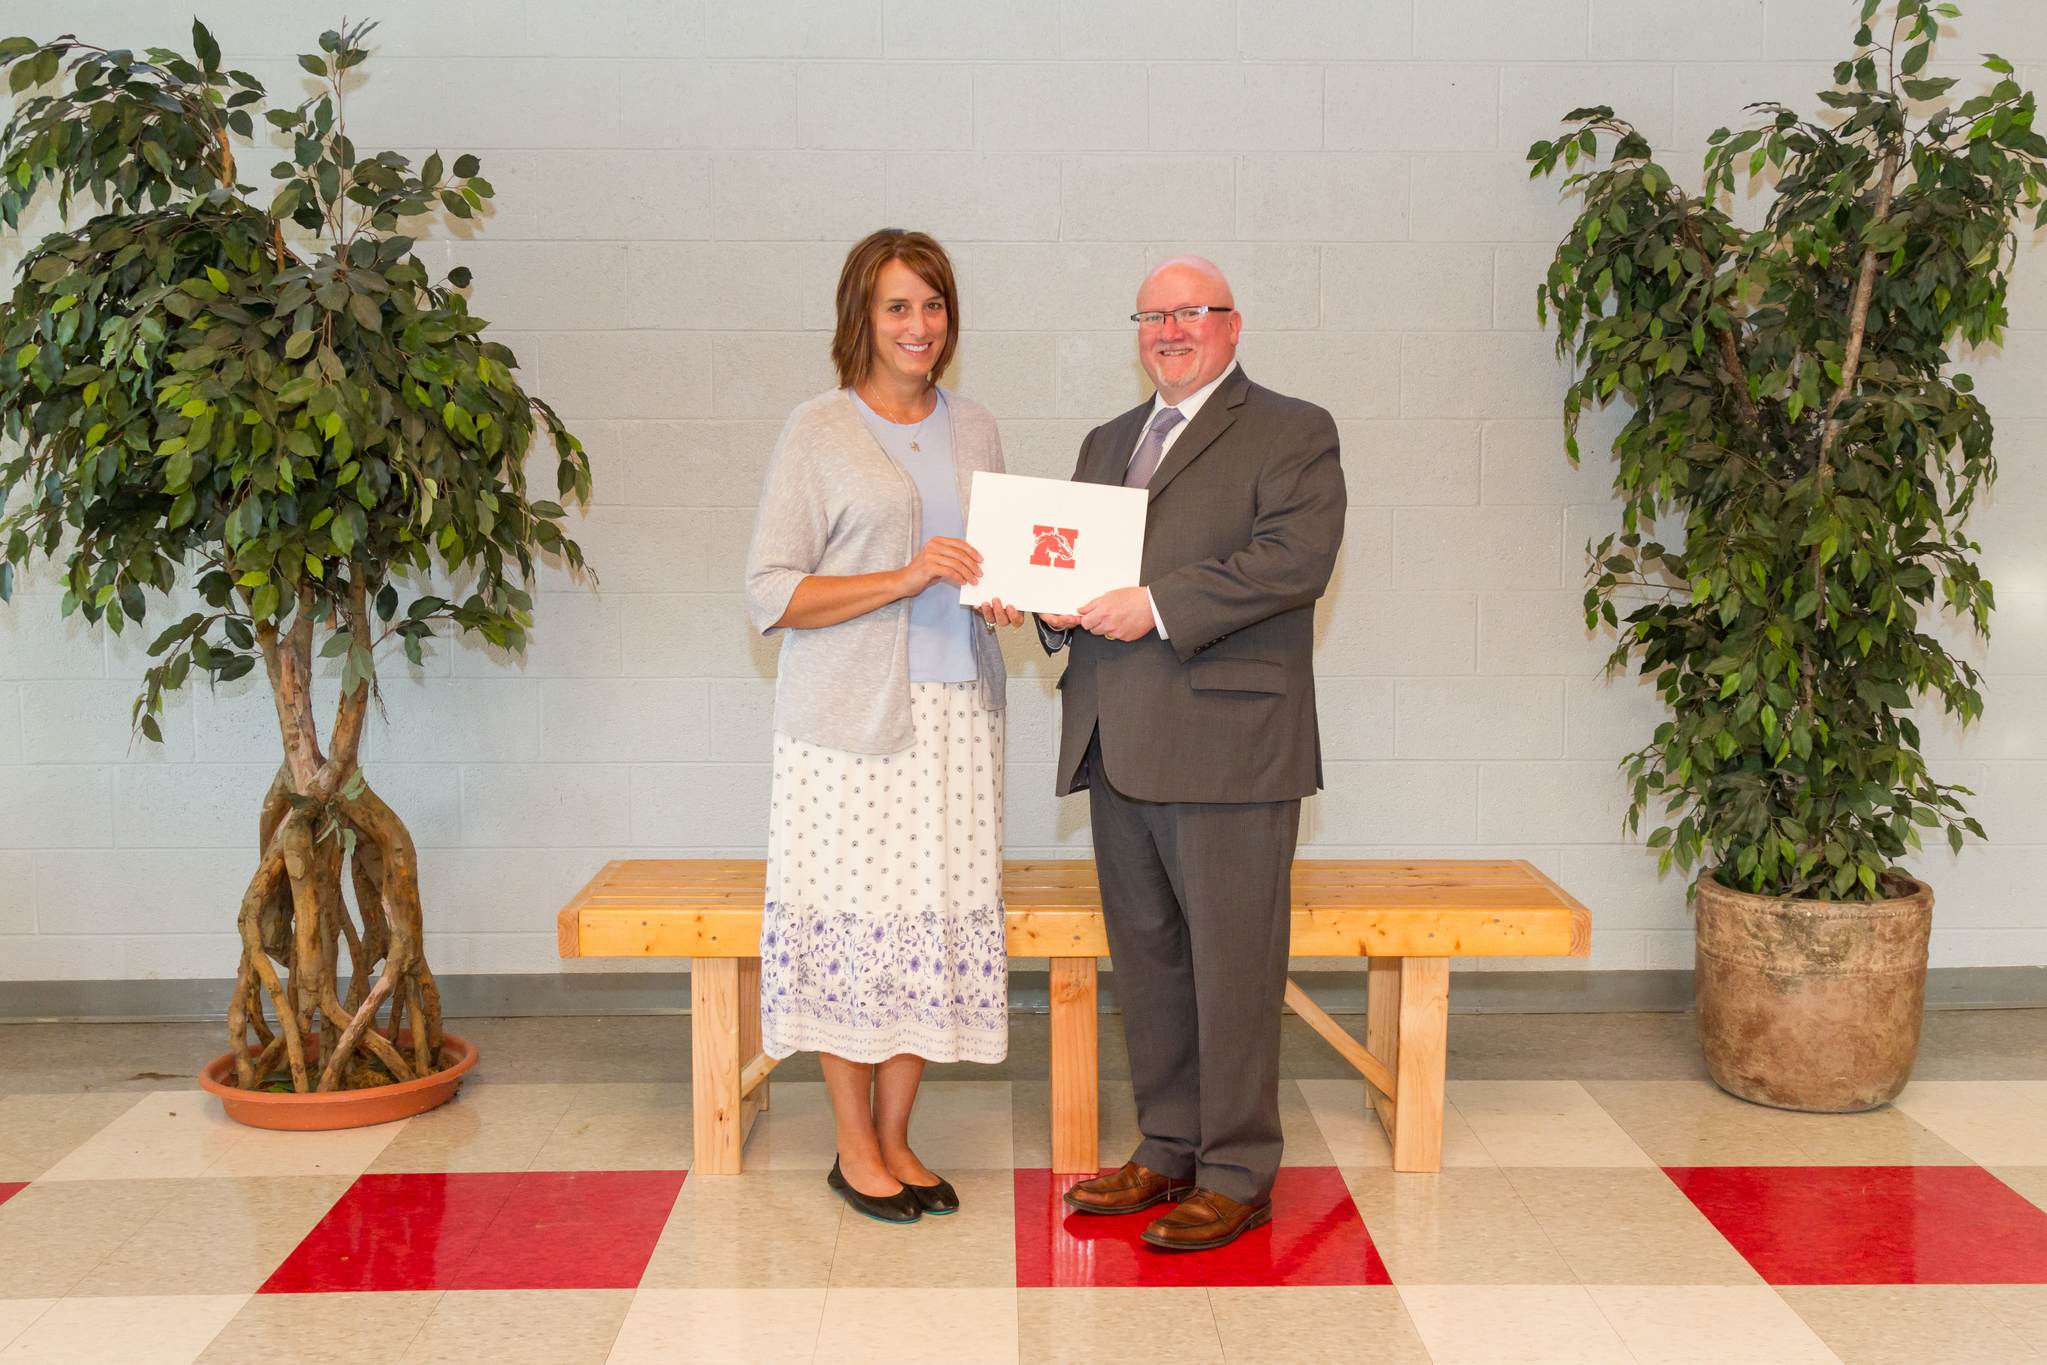 Mrs. McDowell and the Board President holding award